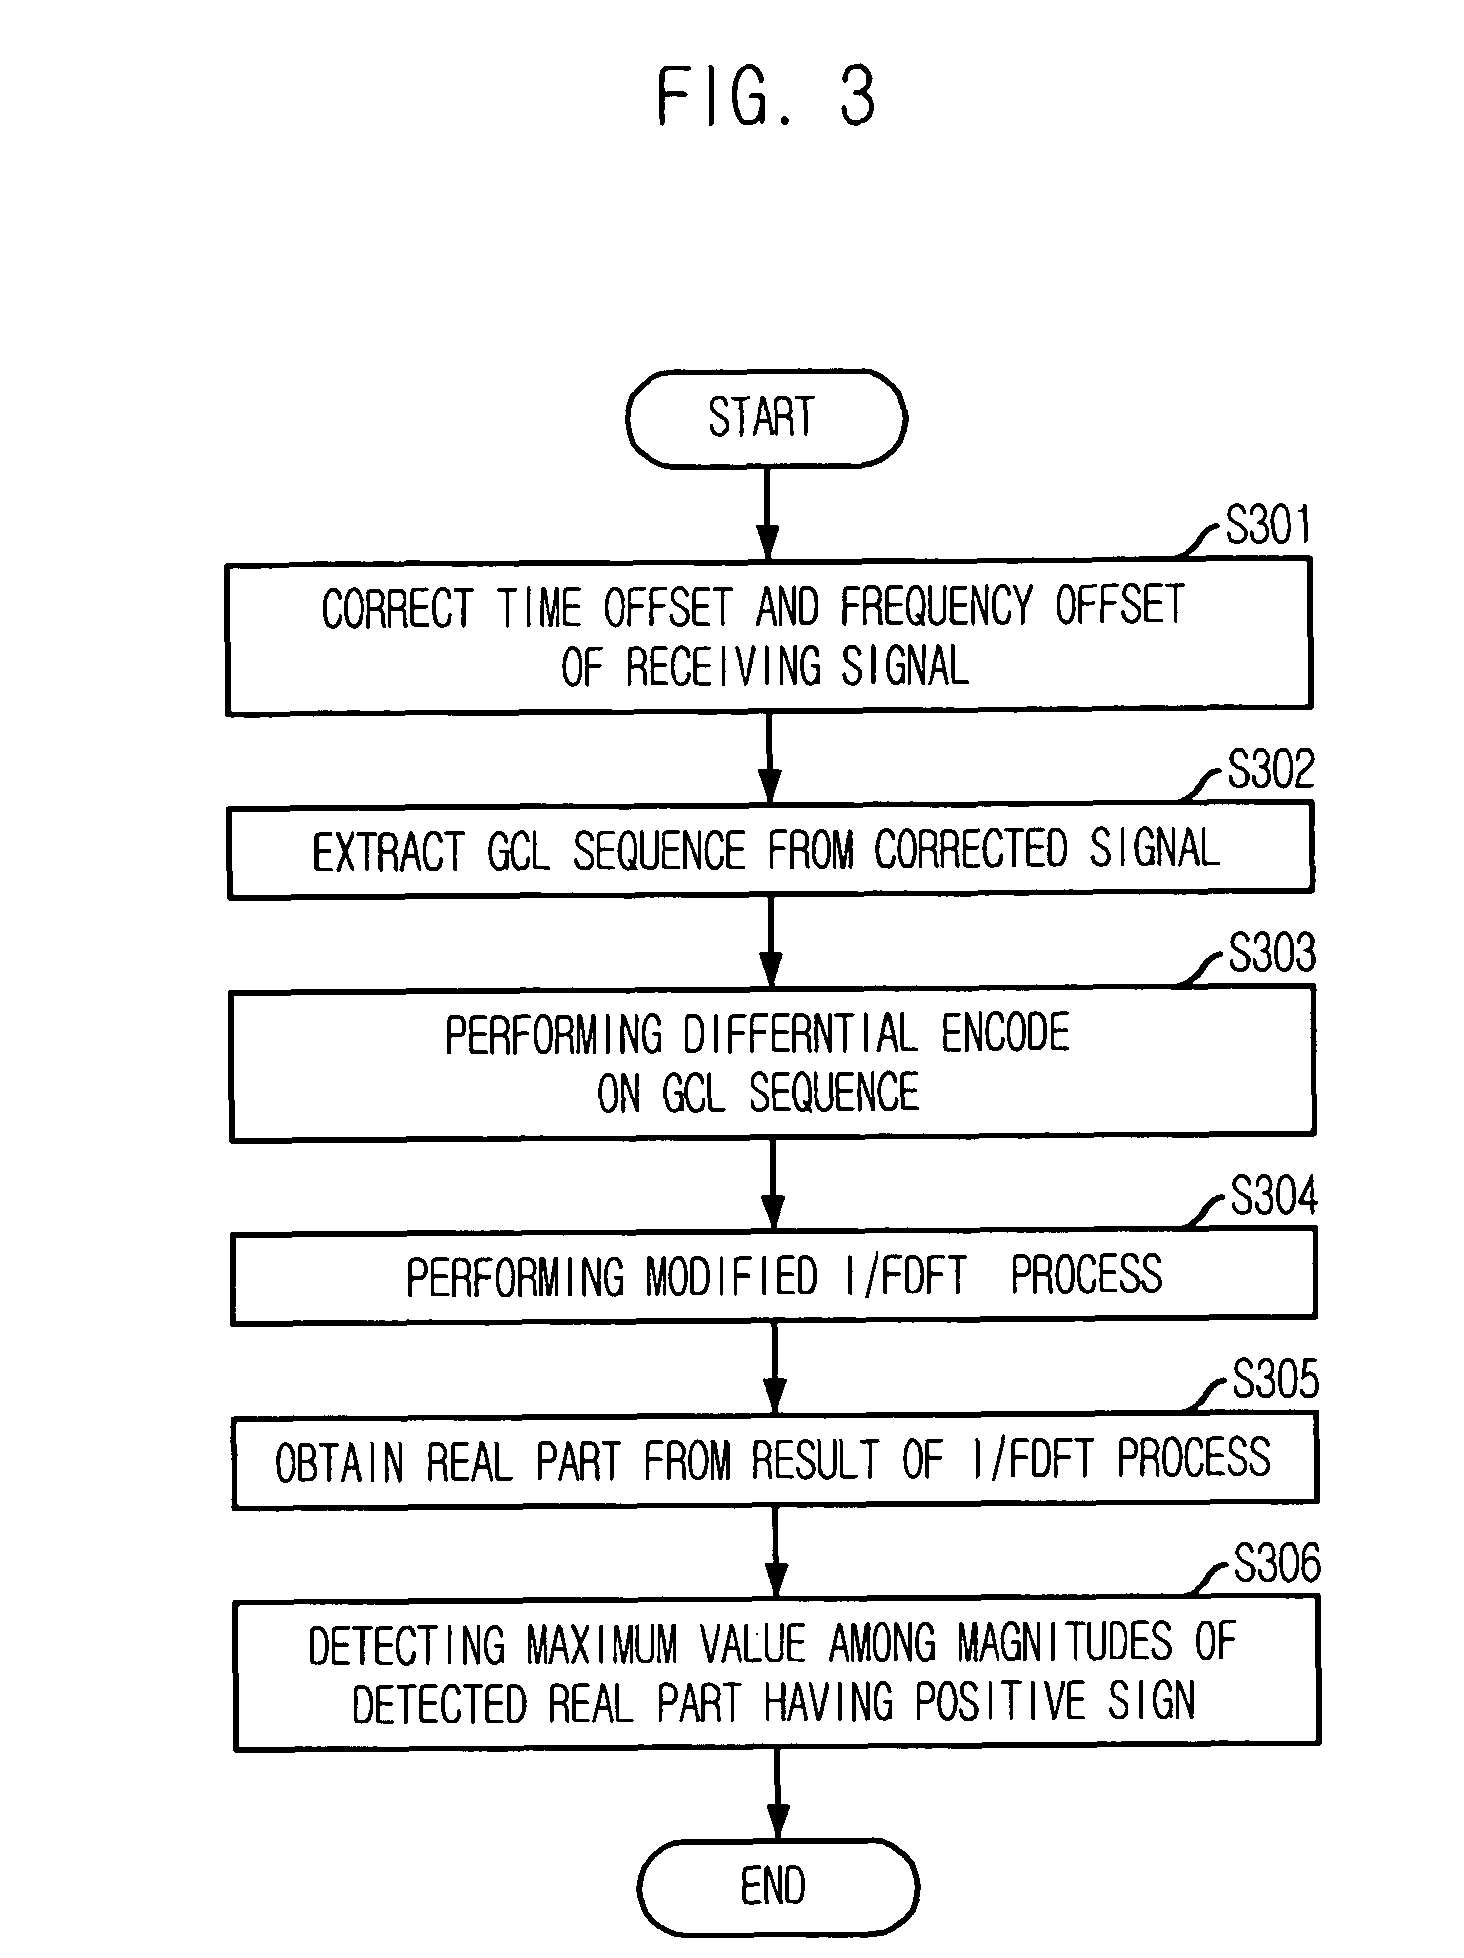 Apparatus and method for detecting advanced GCL sequence in wireless communication system